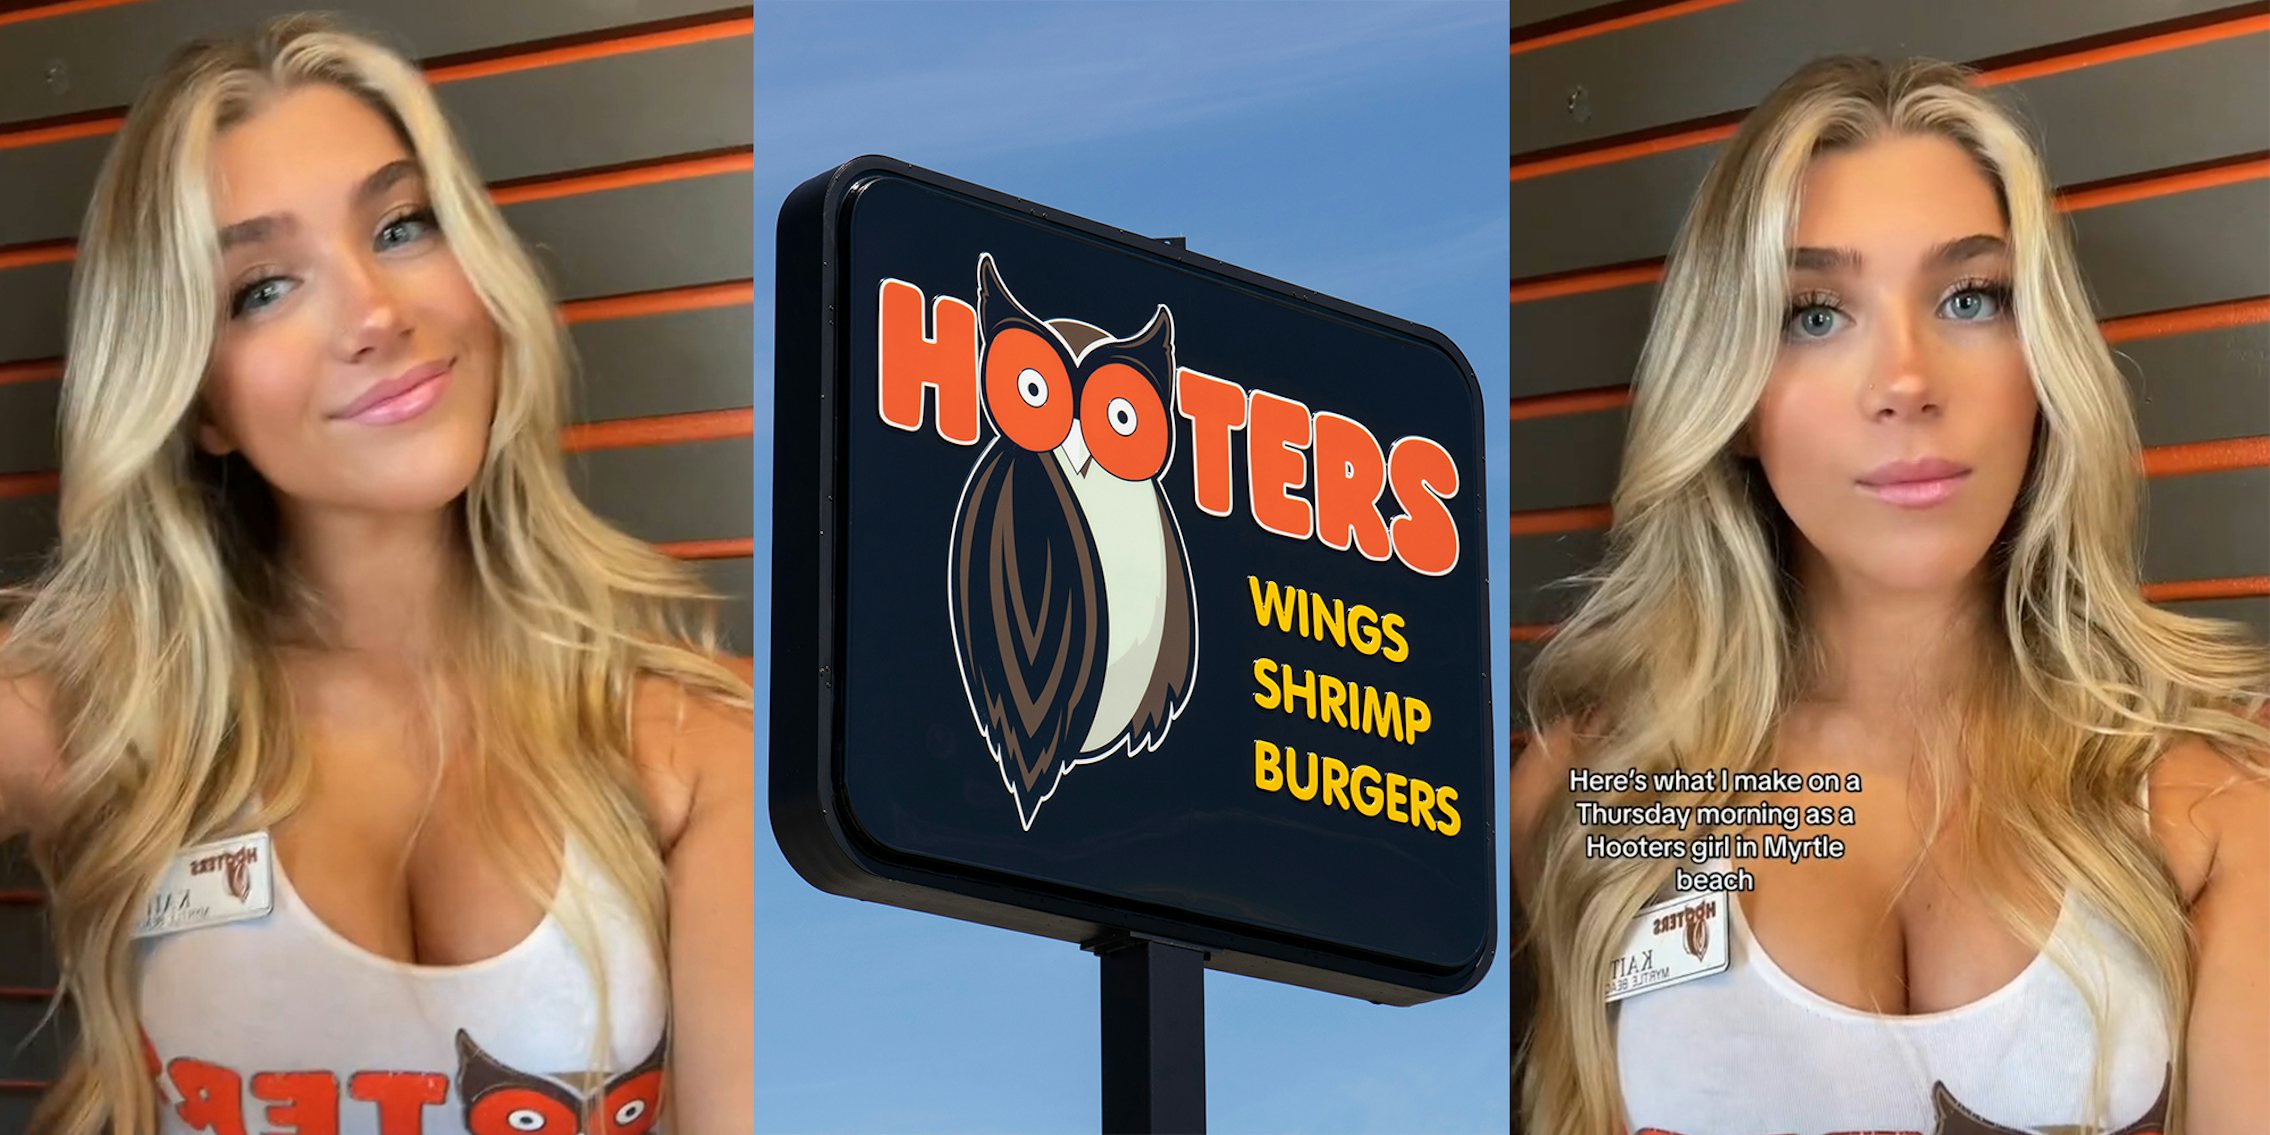 Hooters server shows what she makes in tips during a shift